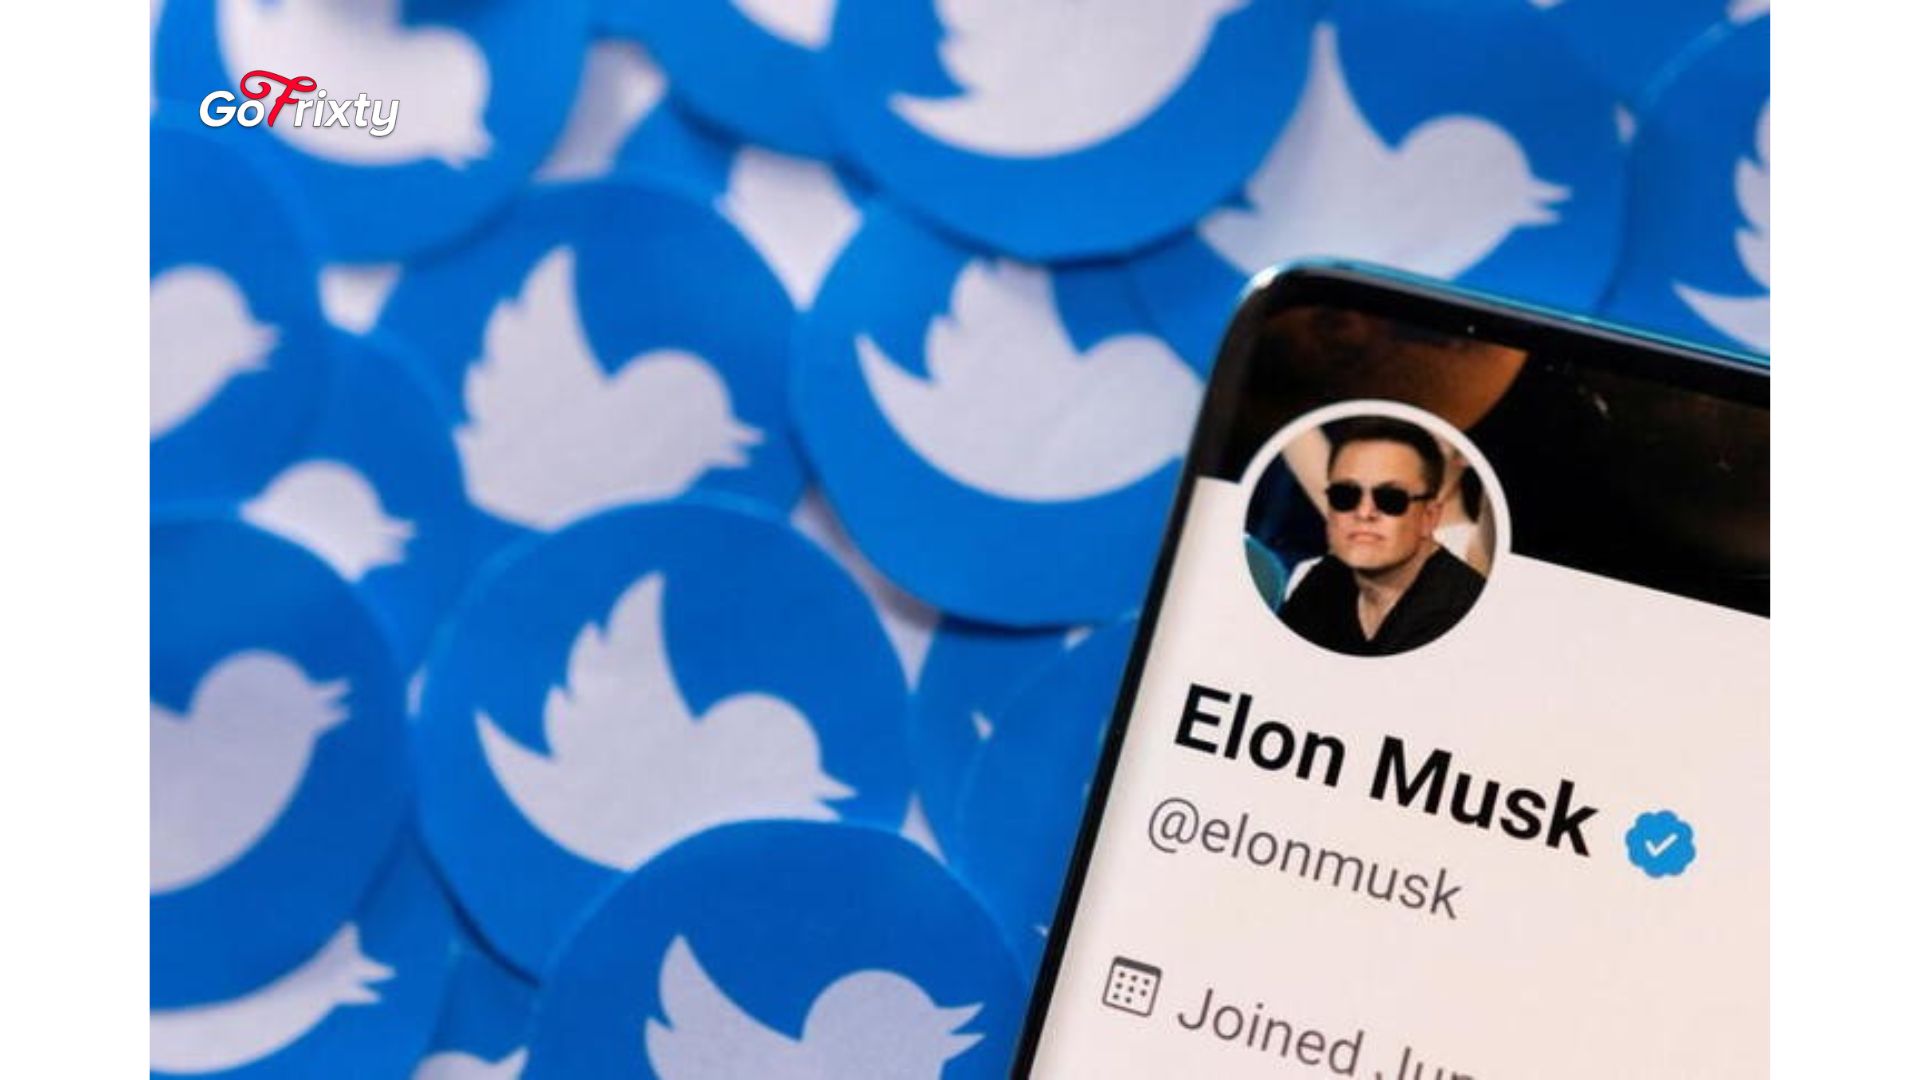 Twitter set to provide data on fake accounts demanded by Elon Musk